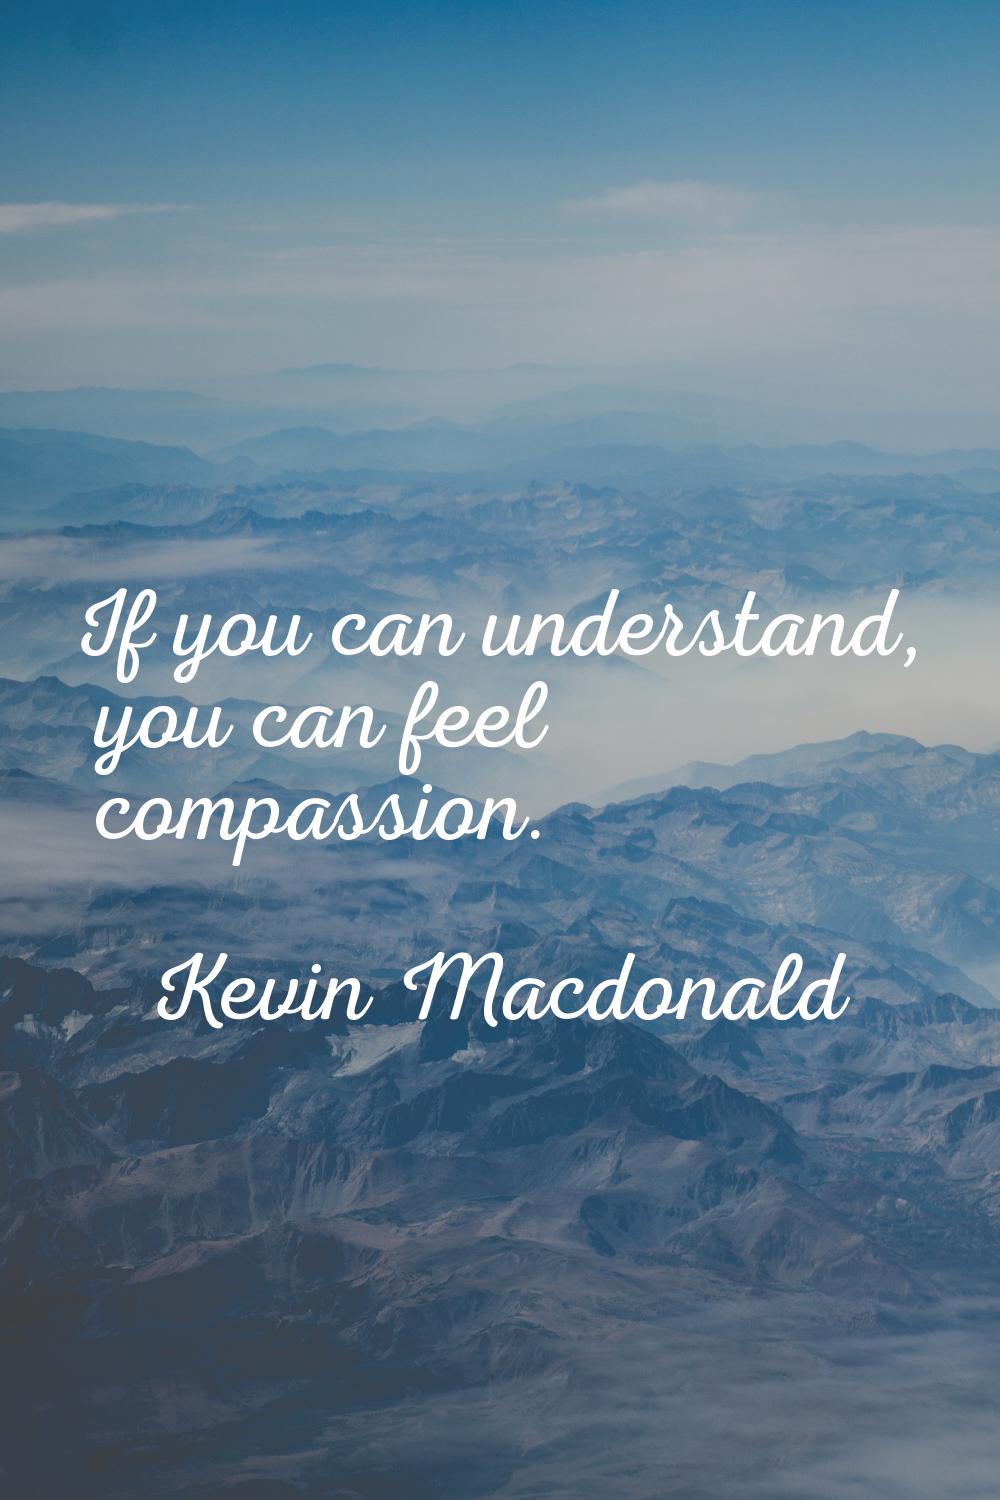 If you can understand, you can feel compassion.